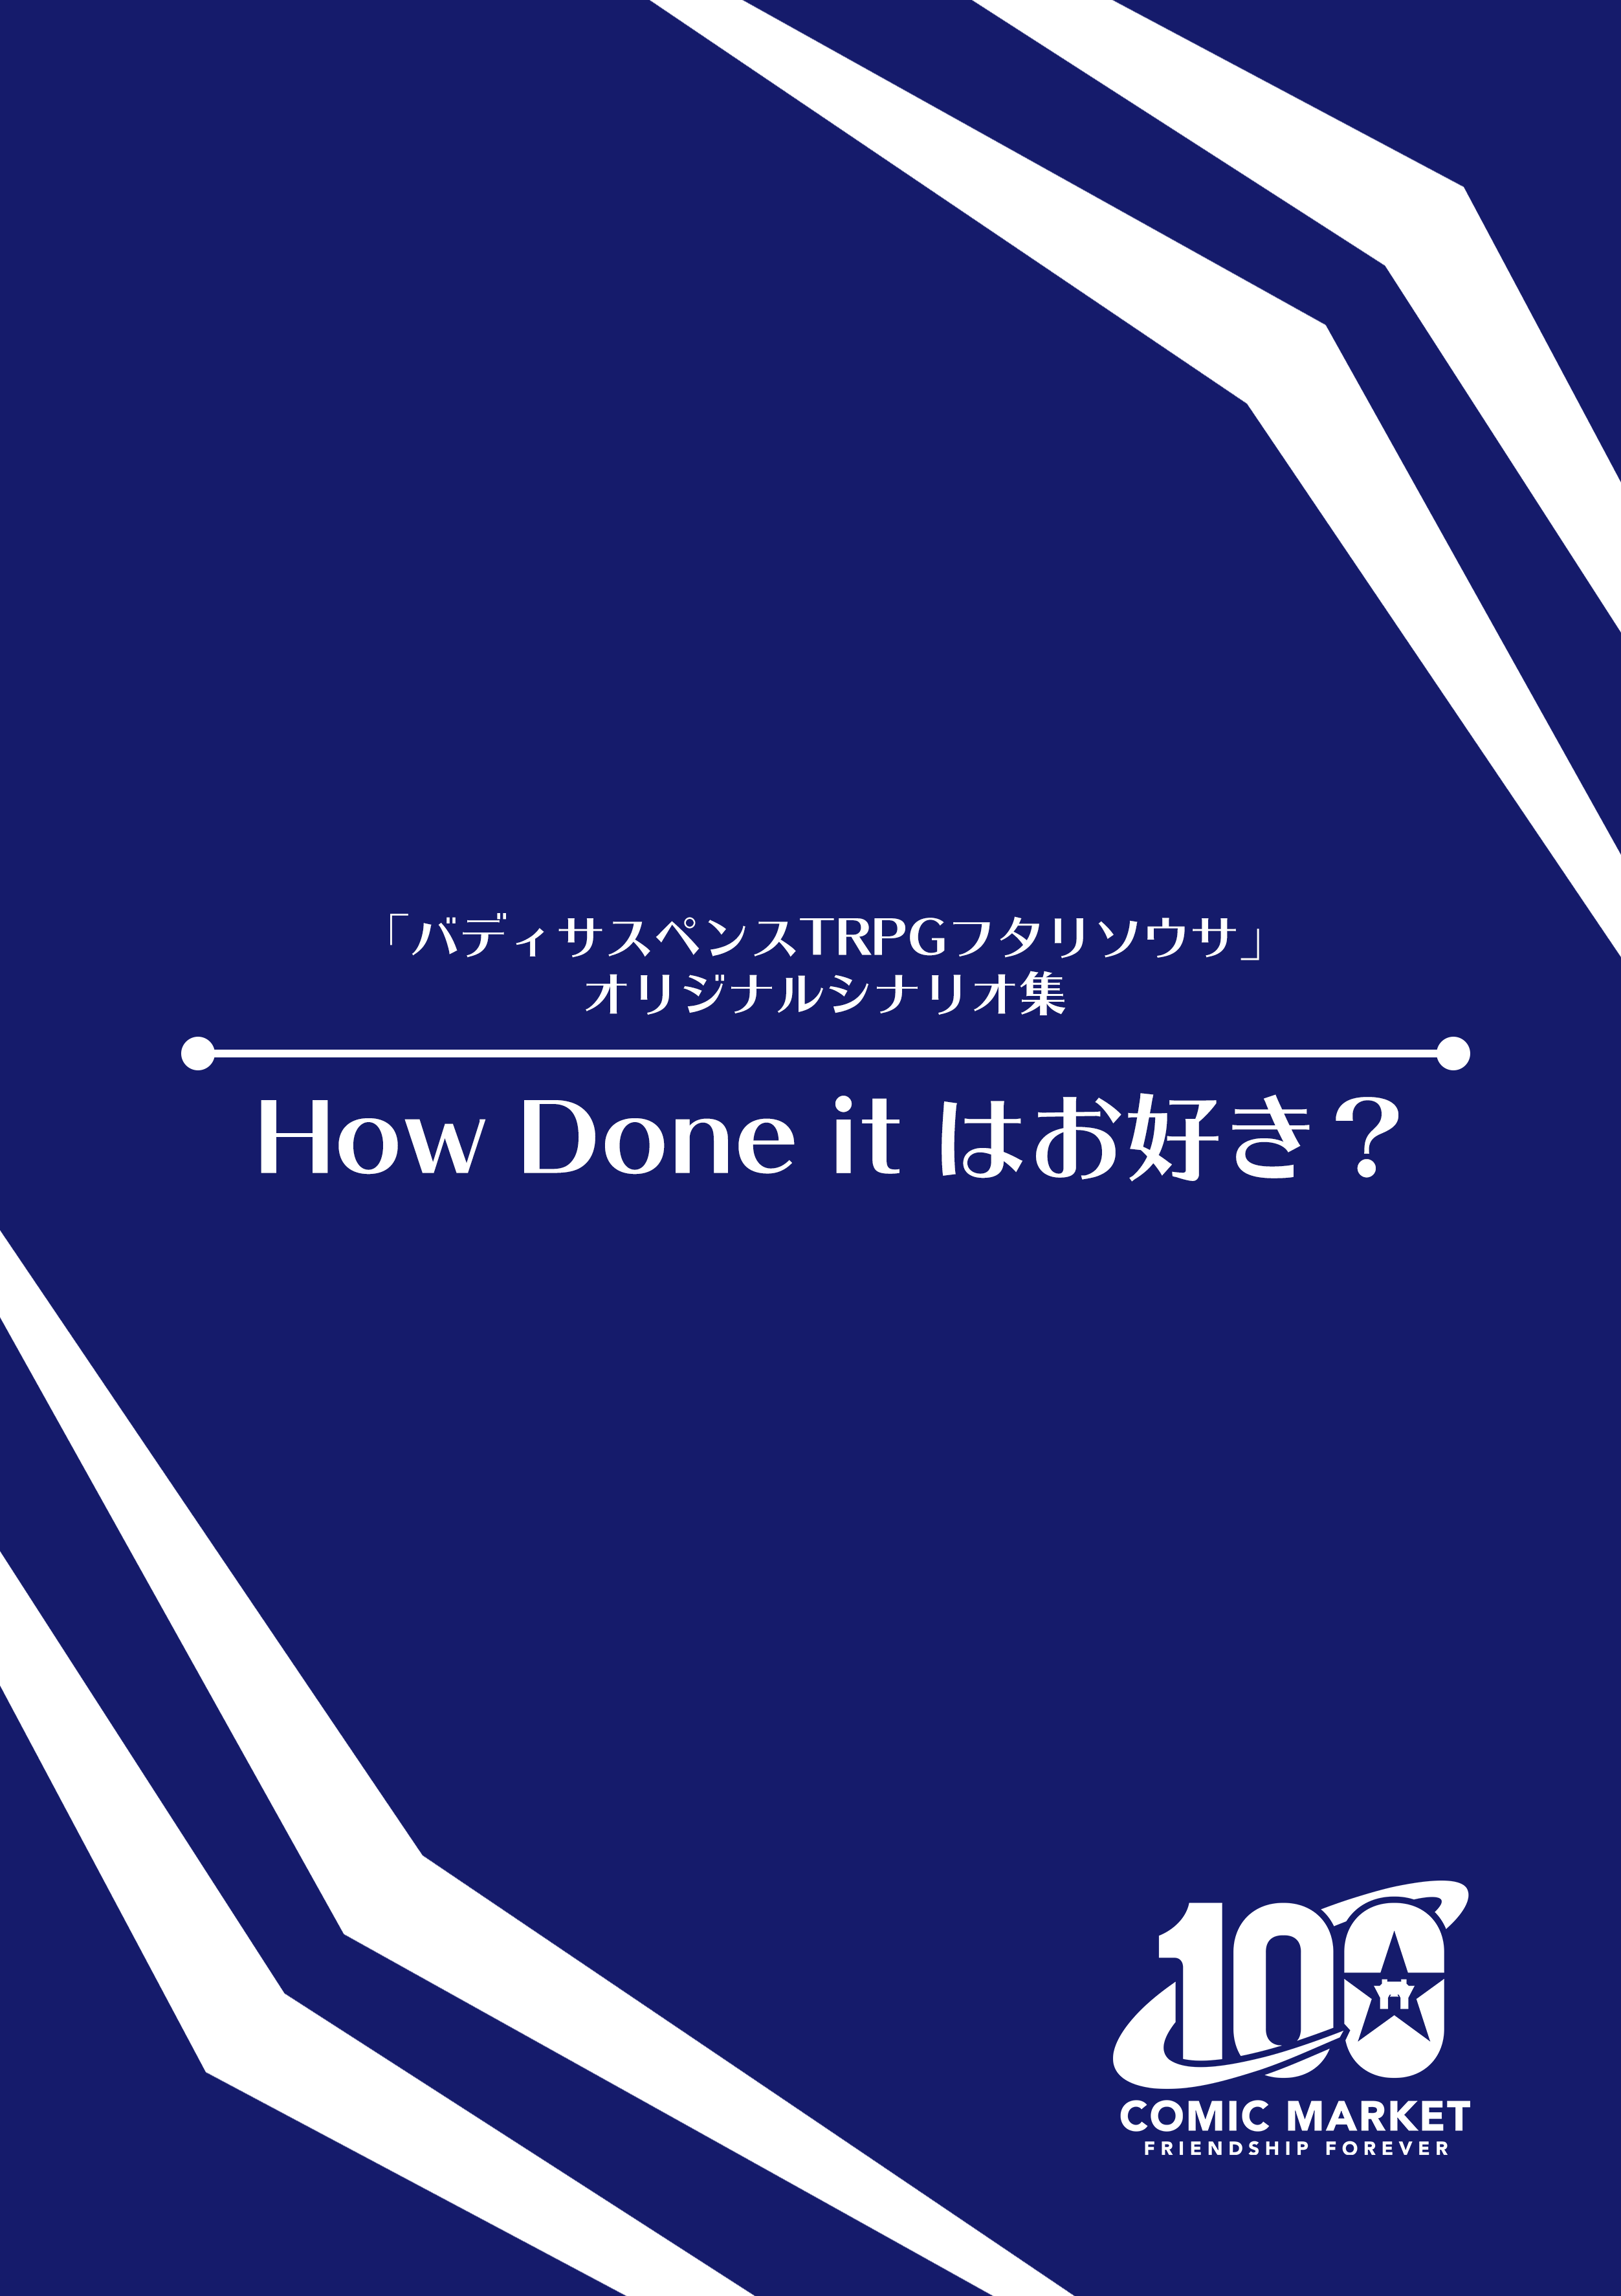 How done itはお好き？表紙